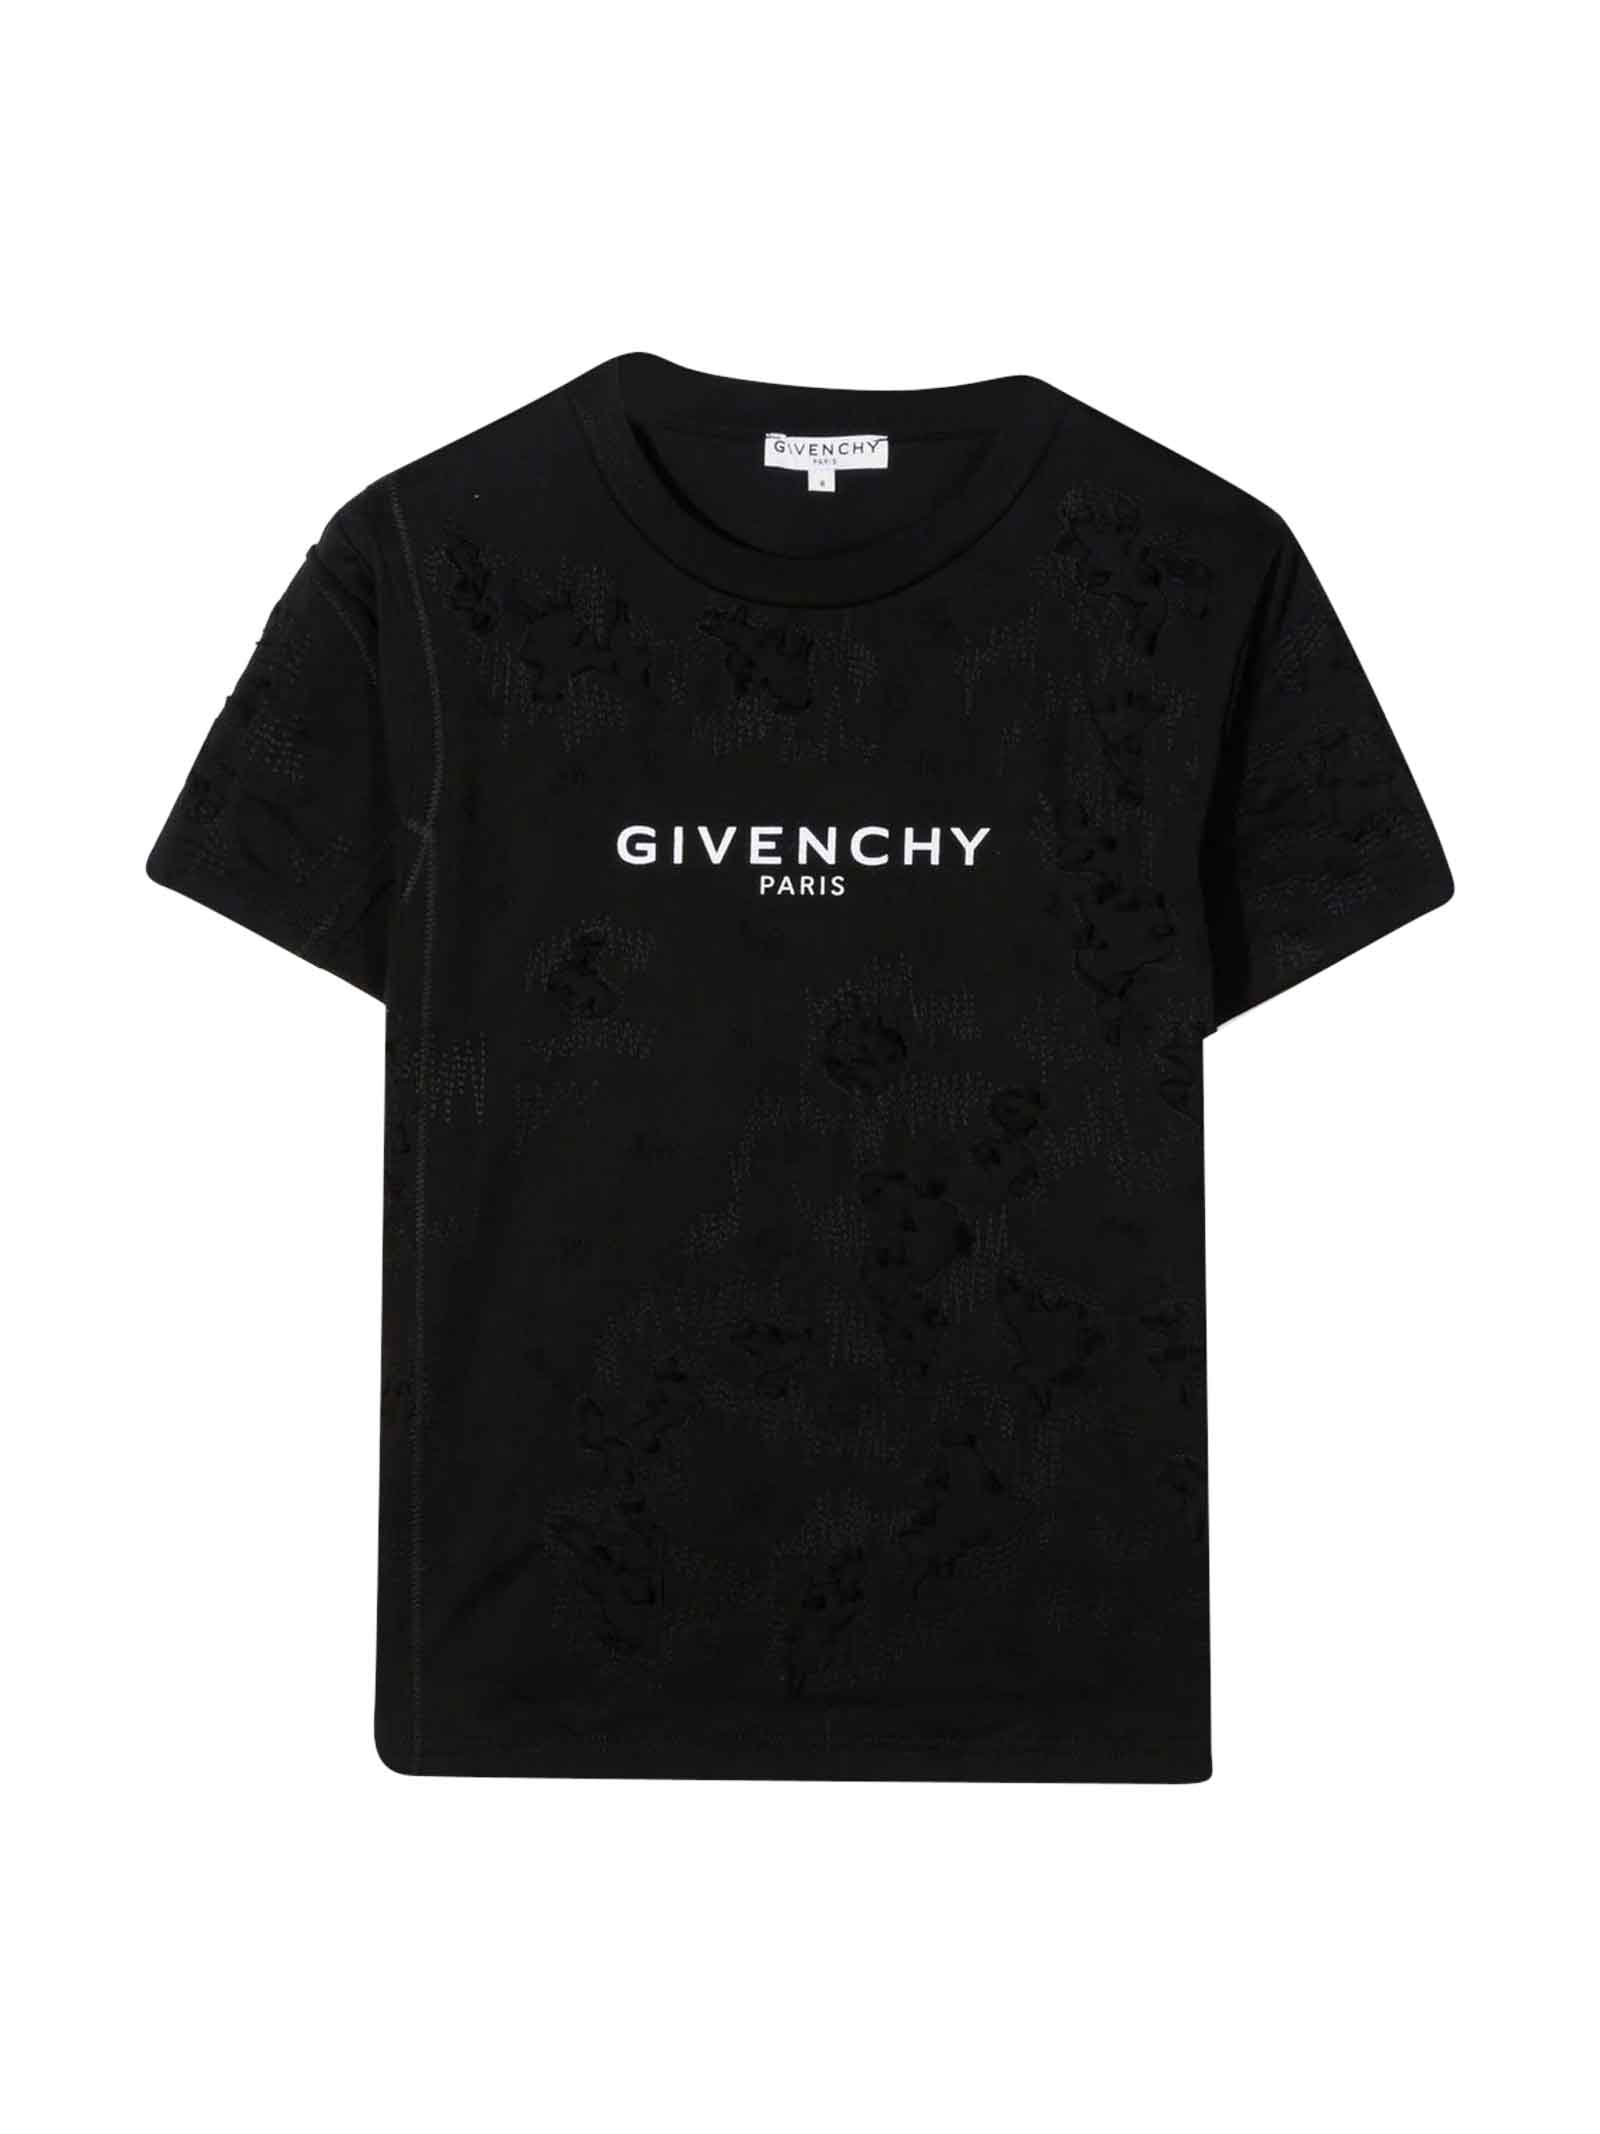 Givenchy Black Unisex T-shirt With Print